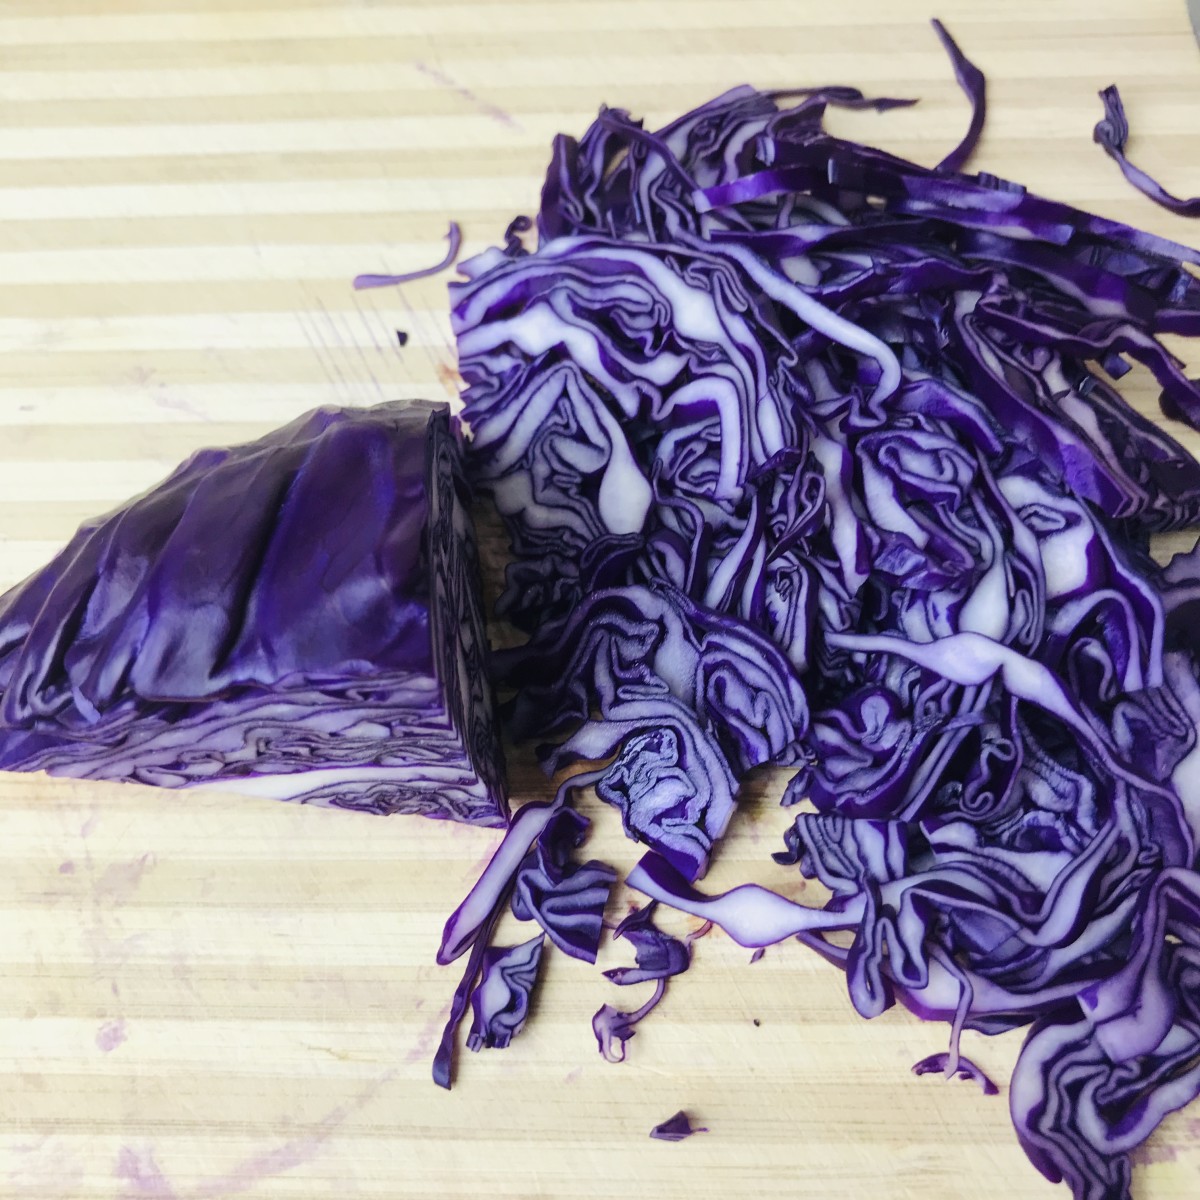 Once the core is removed, thinly slice the cabbage to turn it into shreds.